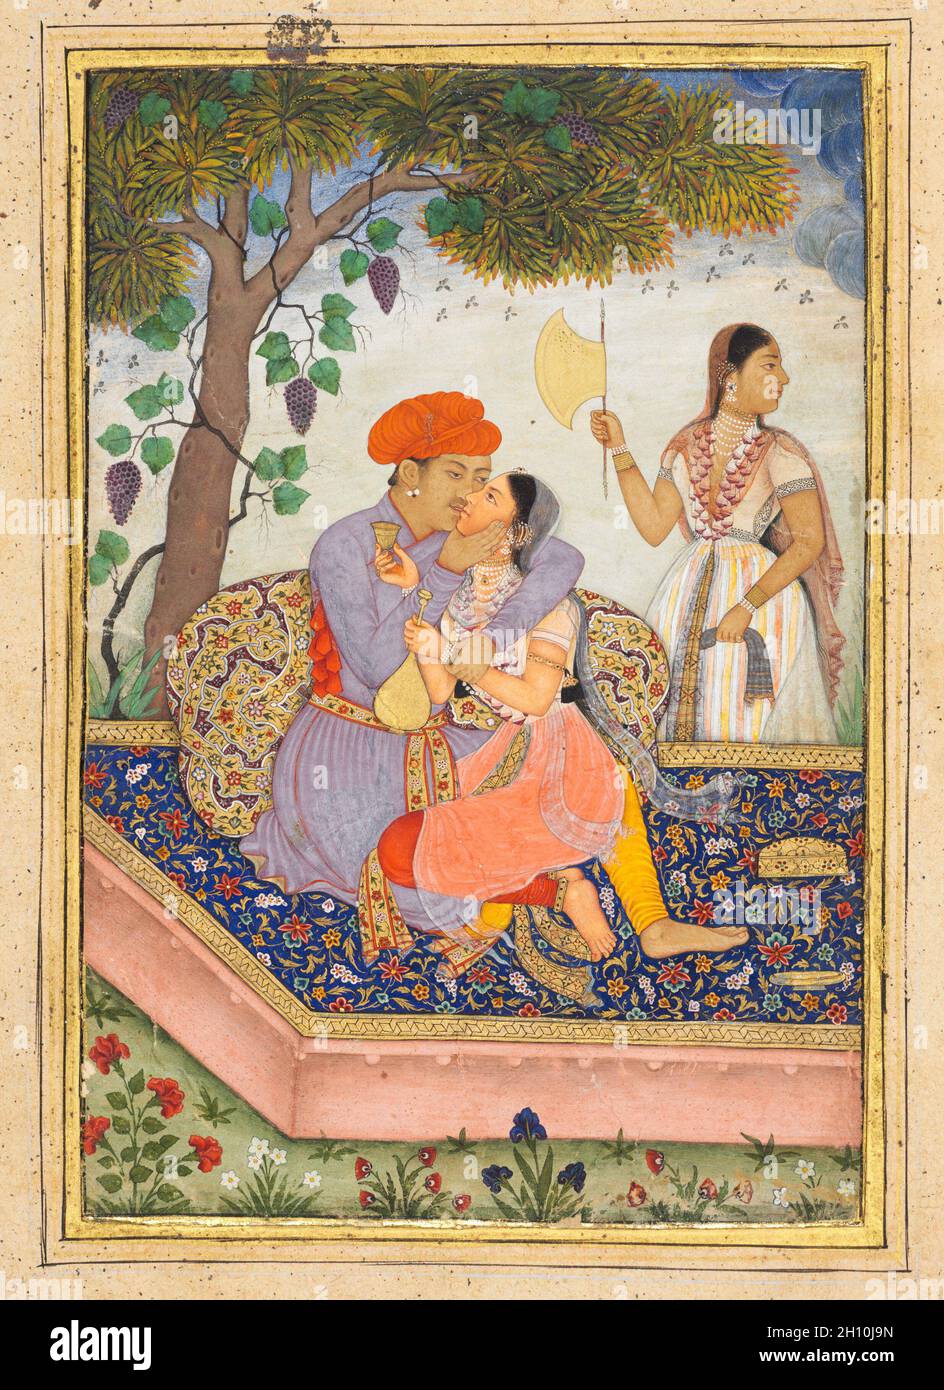 Lovers Embracing, c. 1630. India, Popular Mughal School, probably done at Bikaner, Mughal Dynasty (1526-1756). Opaque watercolor and gold on paper; image: 14.9 x 10.1 cm (5 7/8 x 4 in.); overall: 24 x 16.8 cm (9 7/16 x 6 5/8 in.); with mat: 35.5 x 25.4 cm (14 x 10 in.). Stock Photo